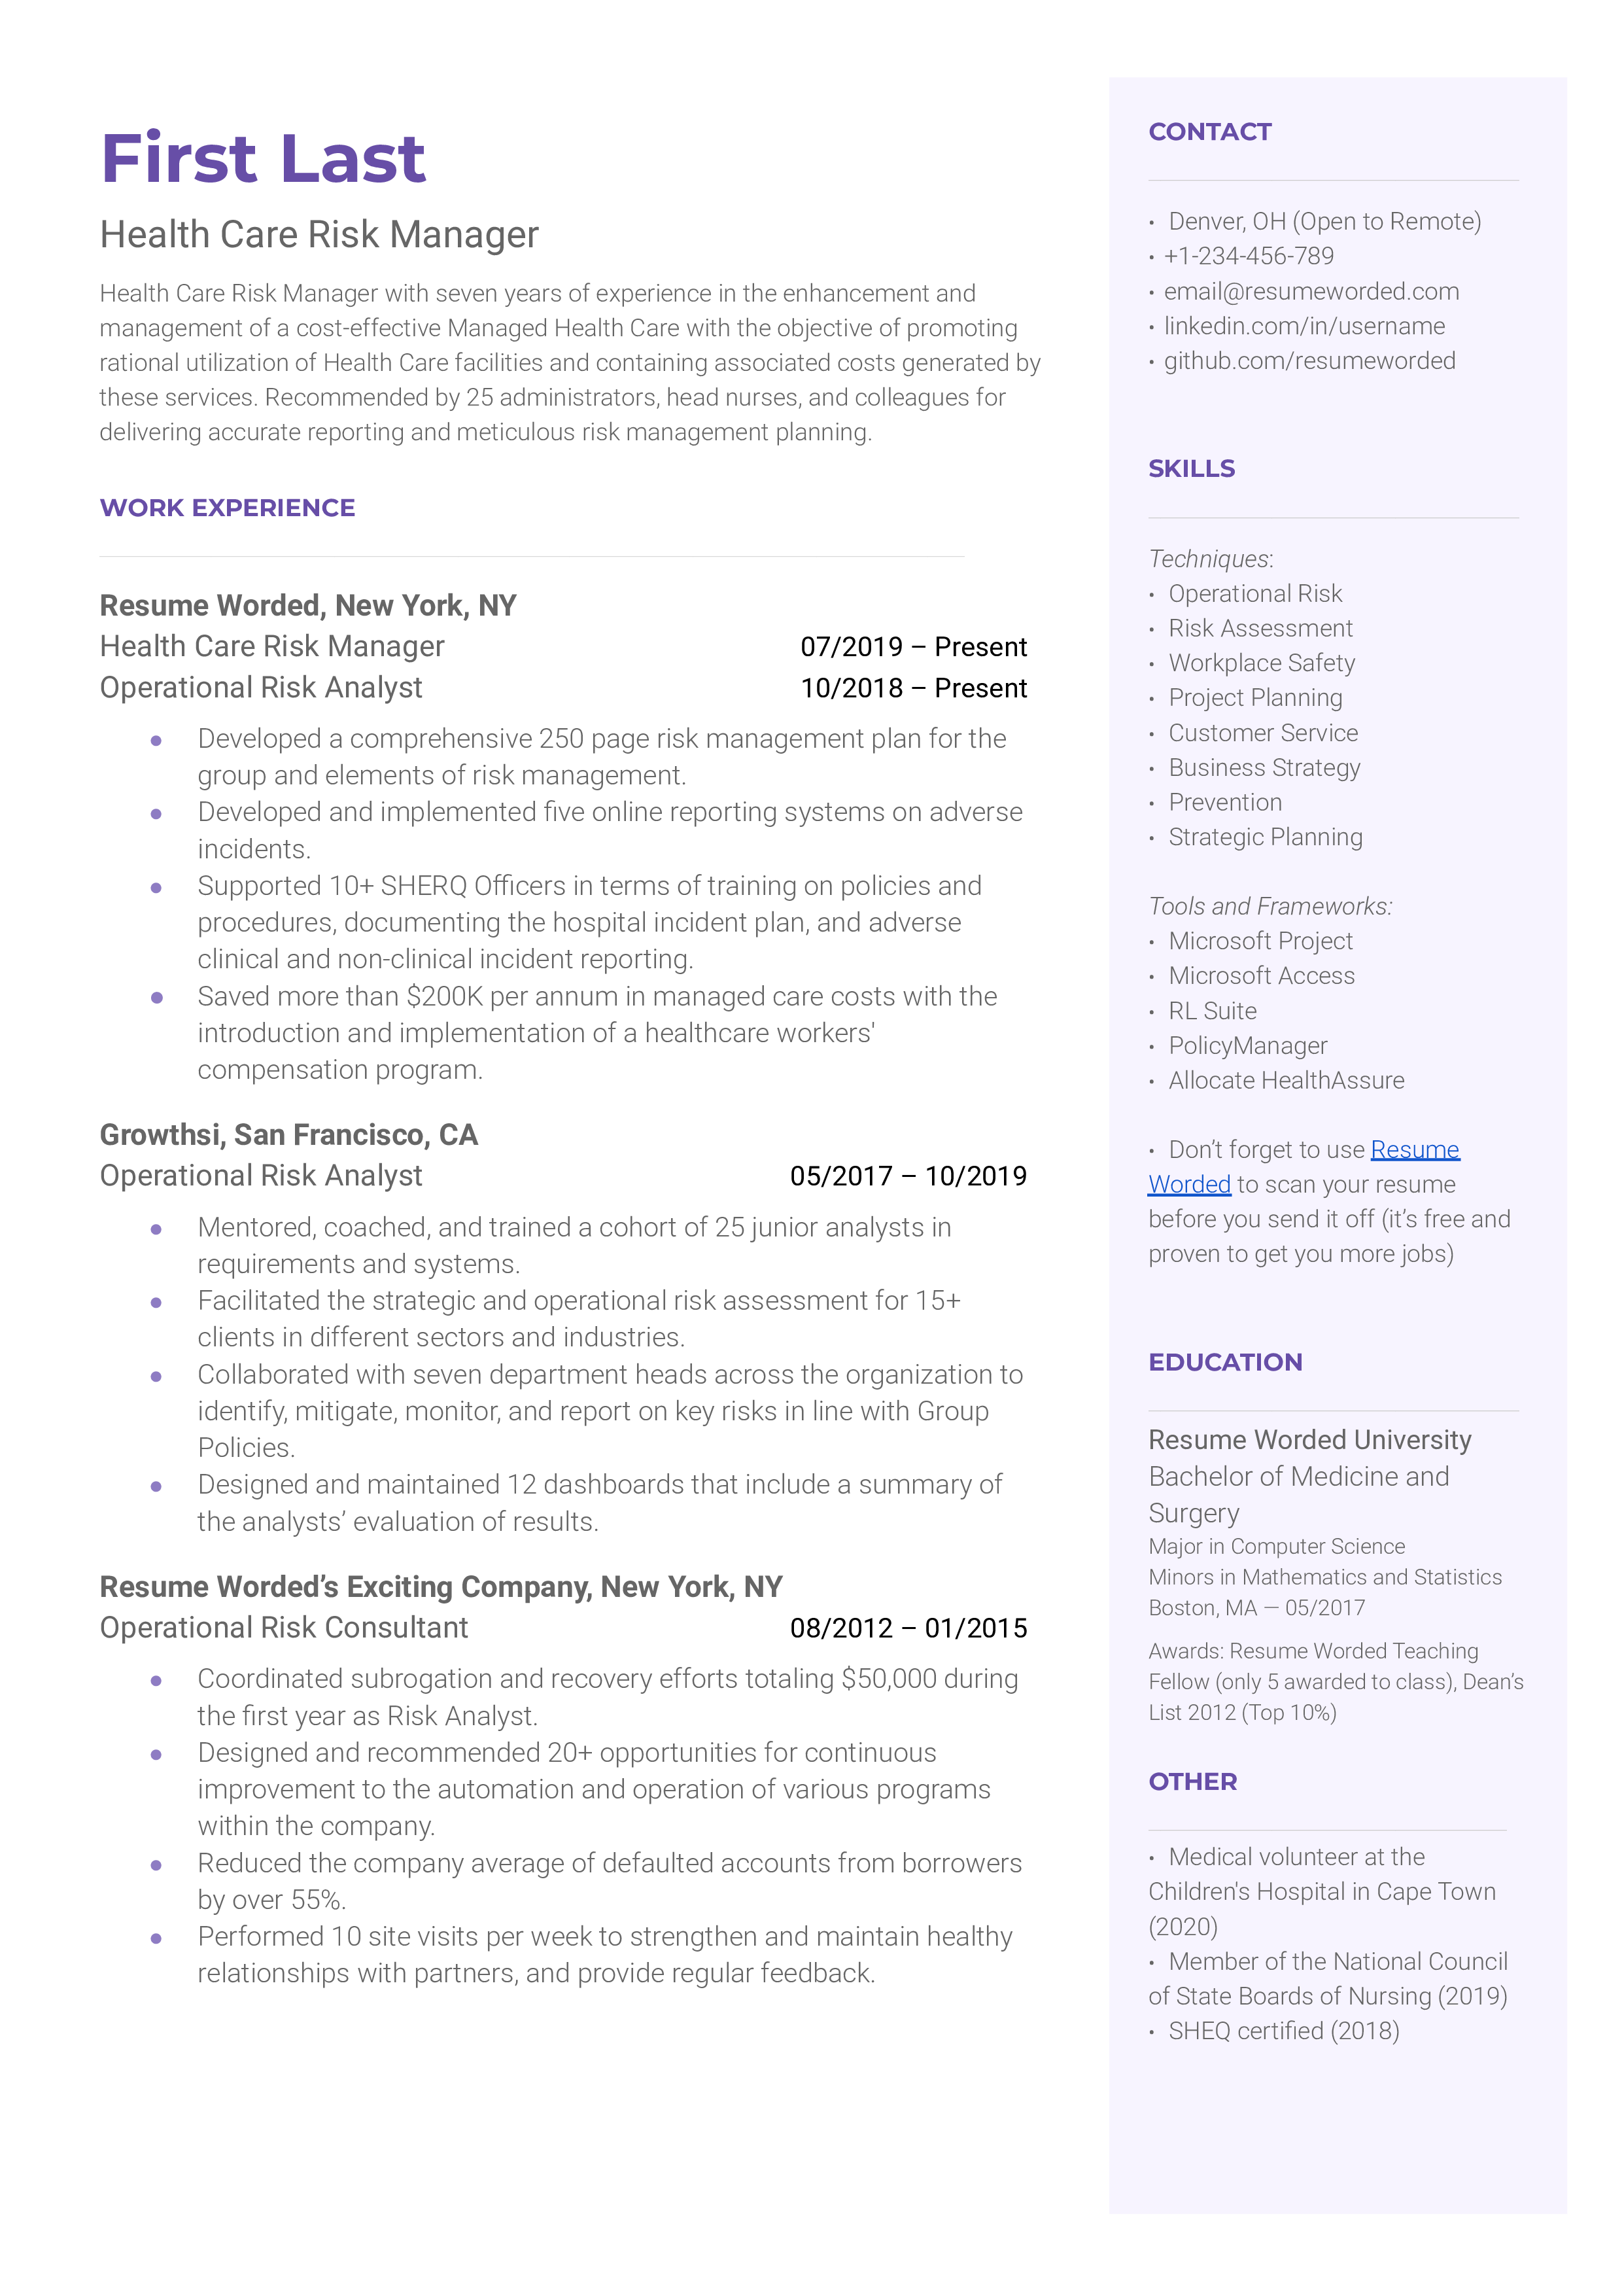 A strong health care risk manager resume sample that highlights the applicant's health education and metrics of success.